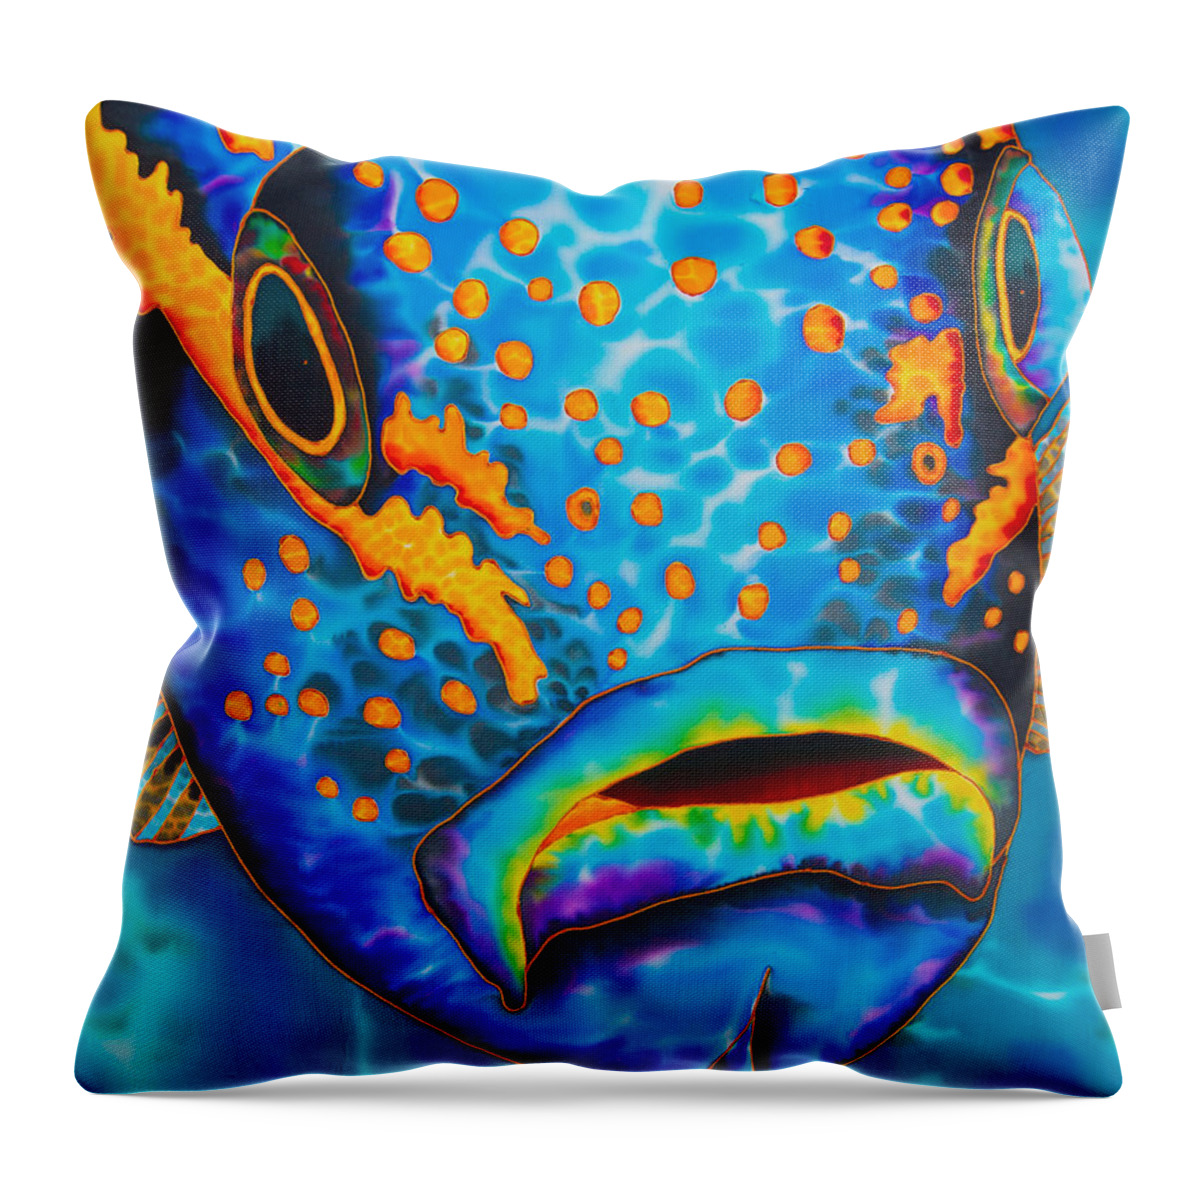 Yellowtail Snapper Throw Pillow featuring the painting Yellowtail Snapper by Daniel Jean-Baptiste